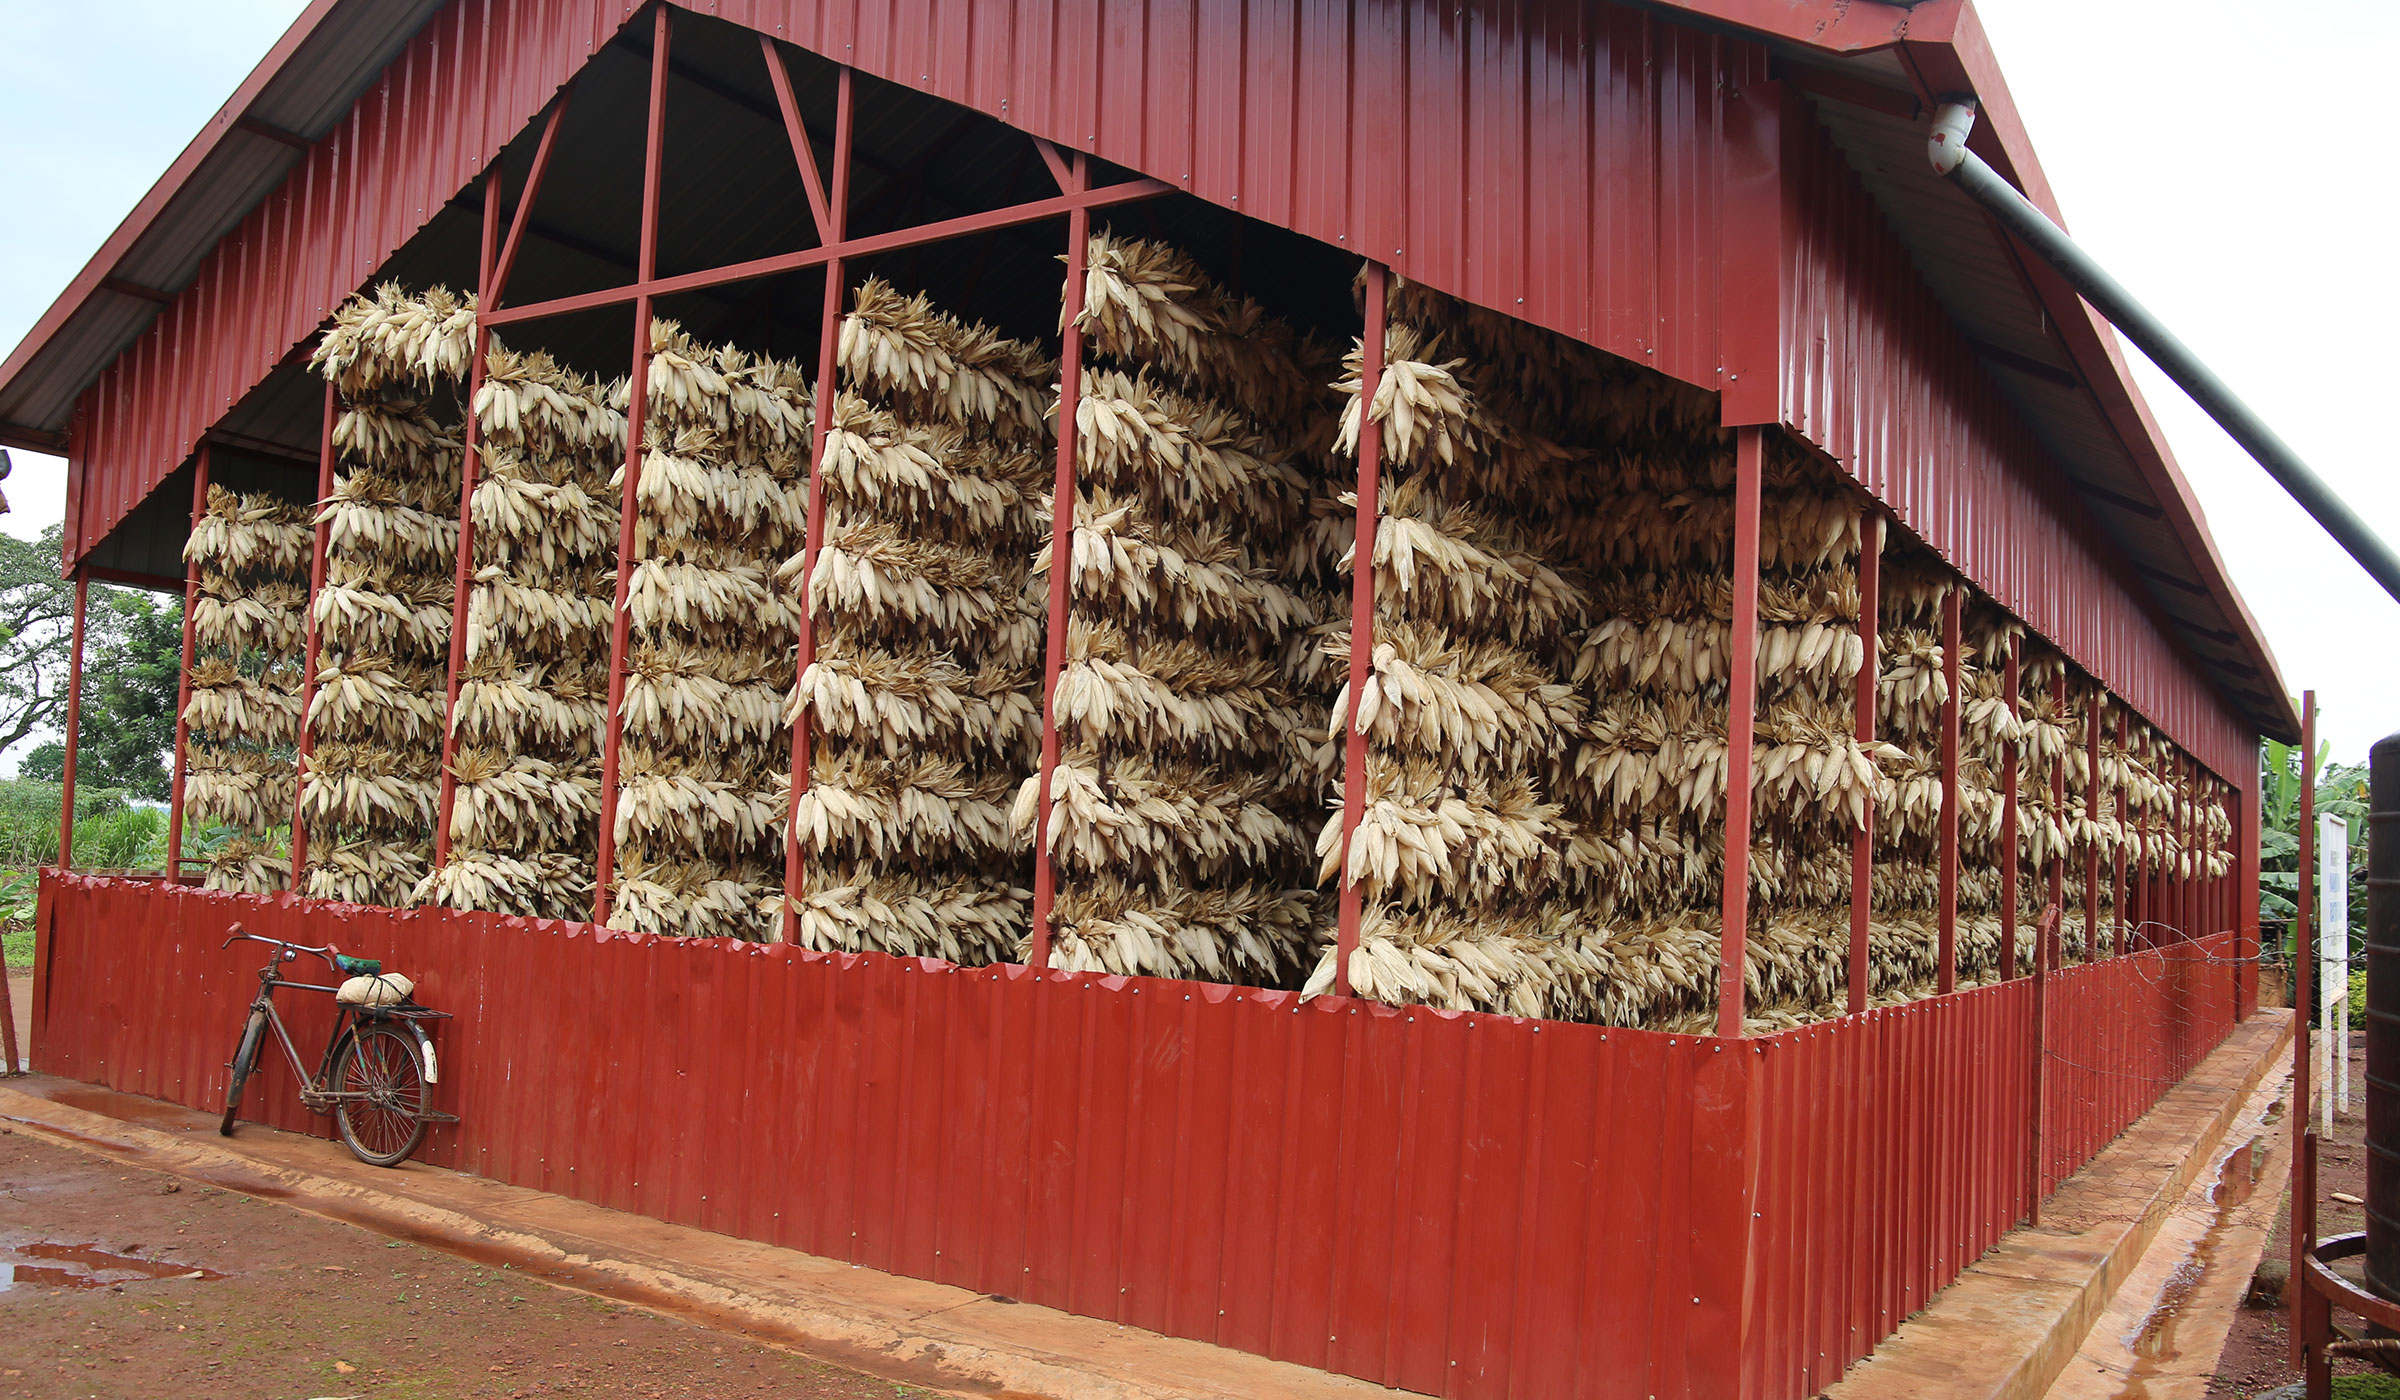 A handling facility in Gahara Sector where 30 tones of maize can be dried.  Photos by Kelly Rwamapera.